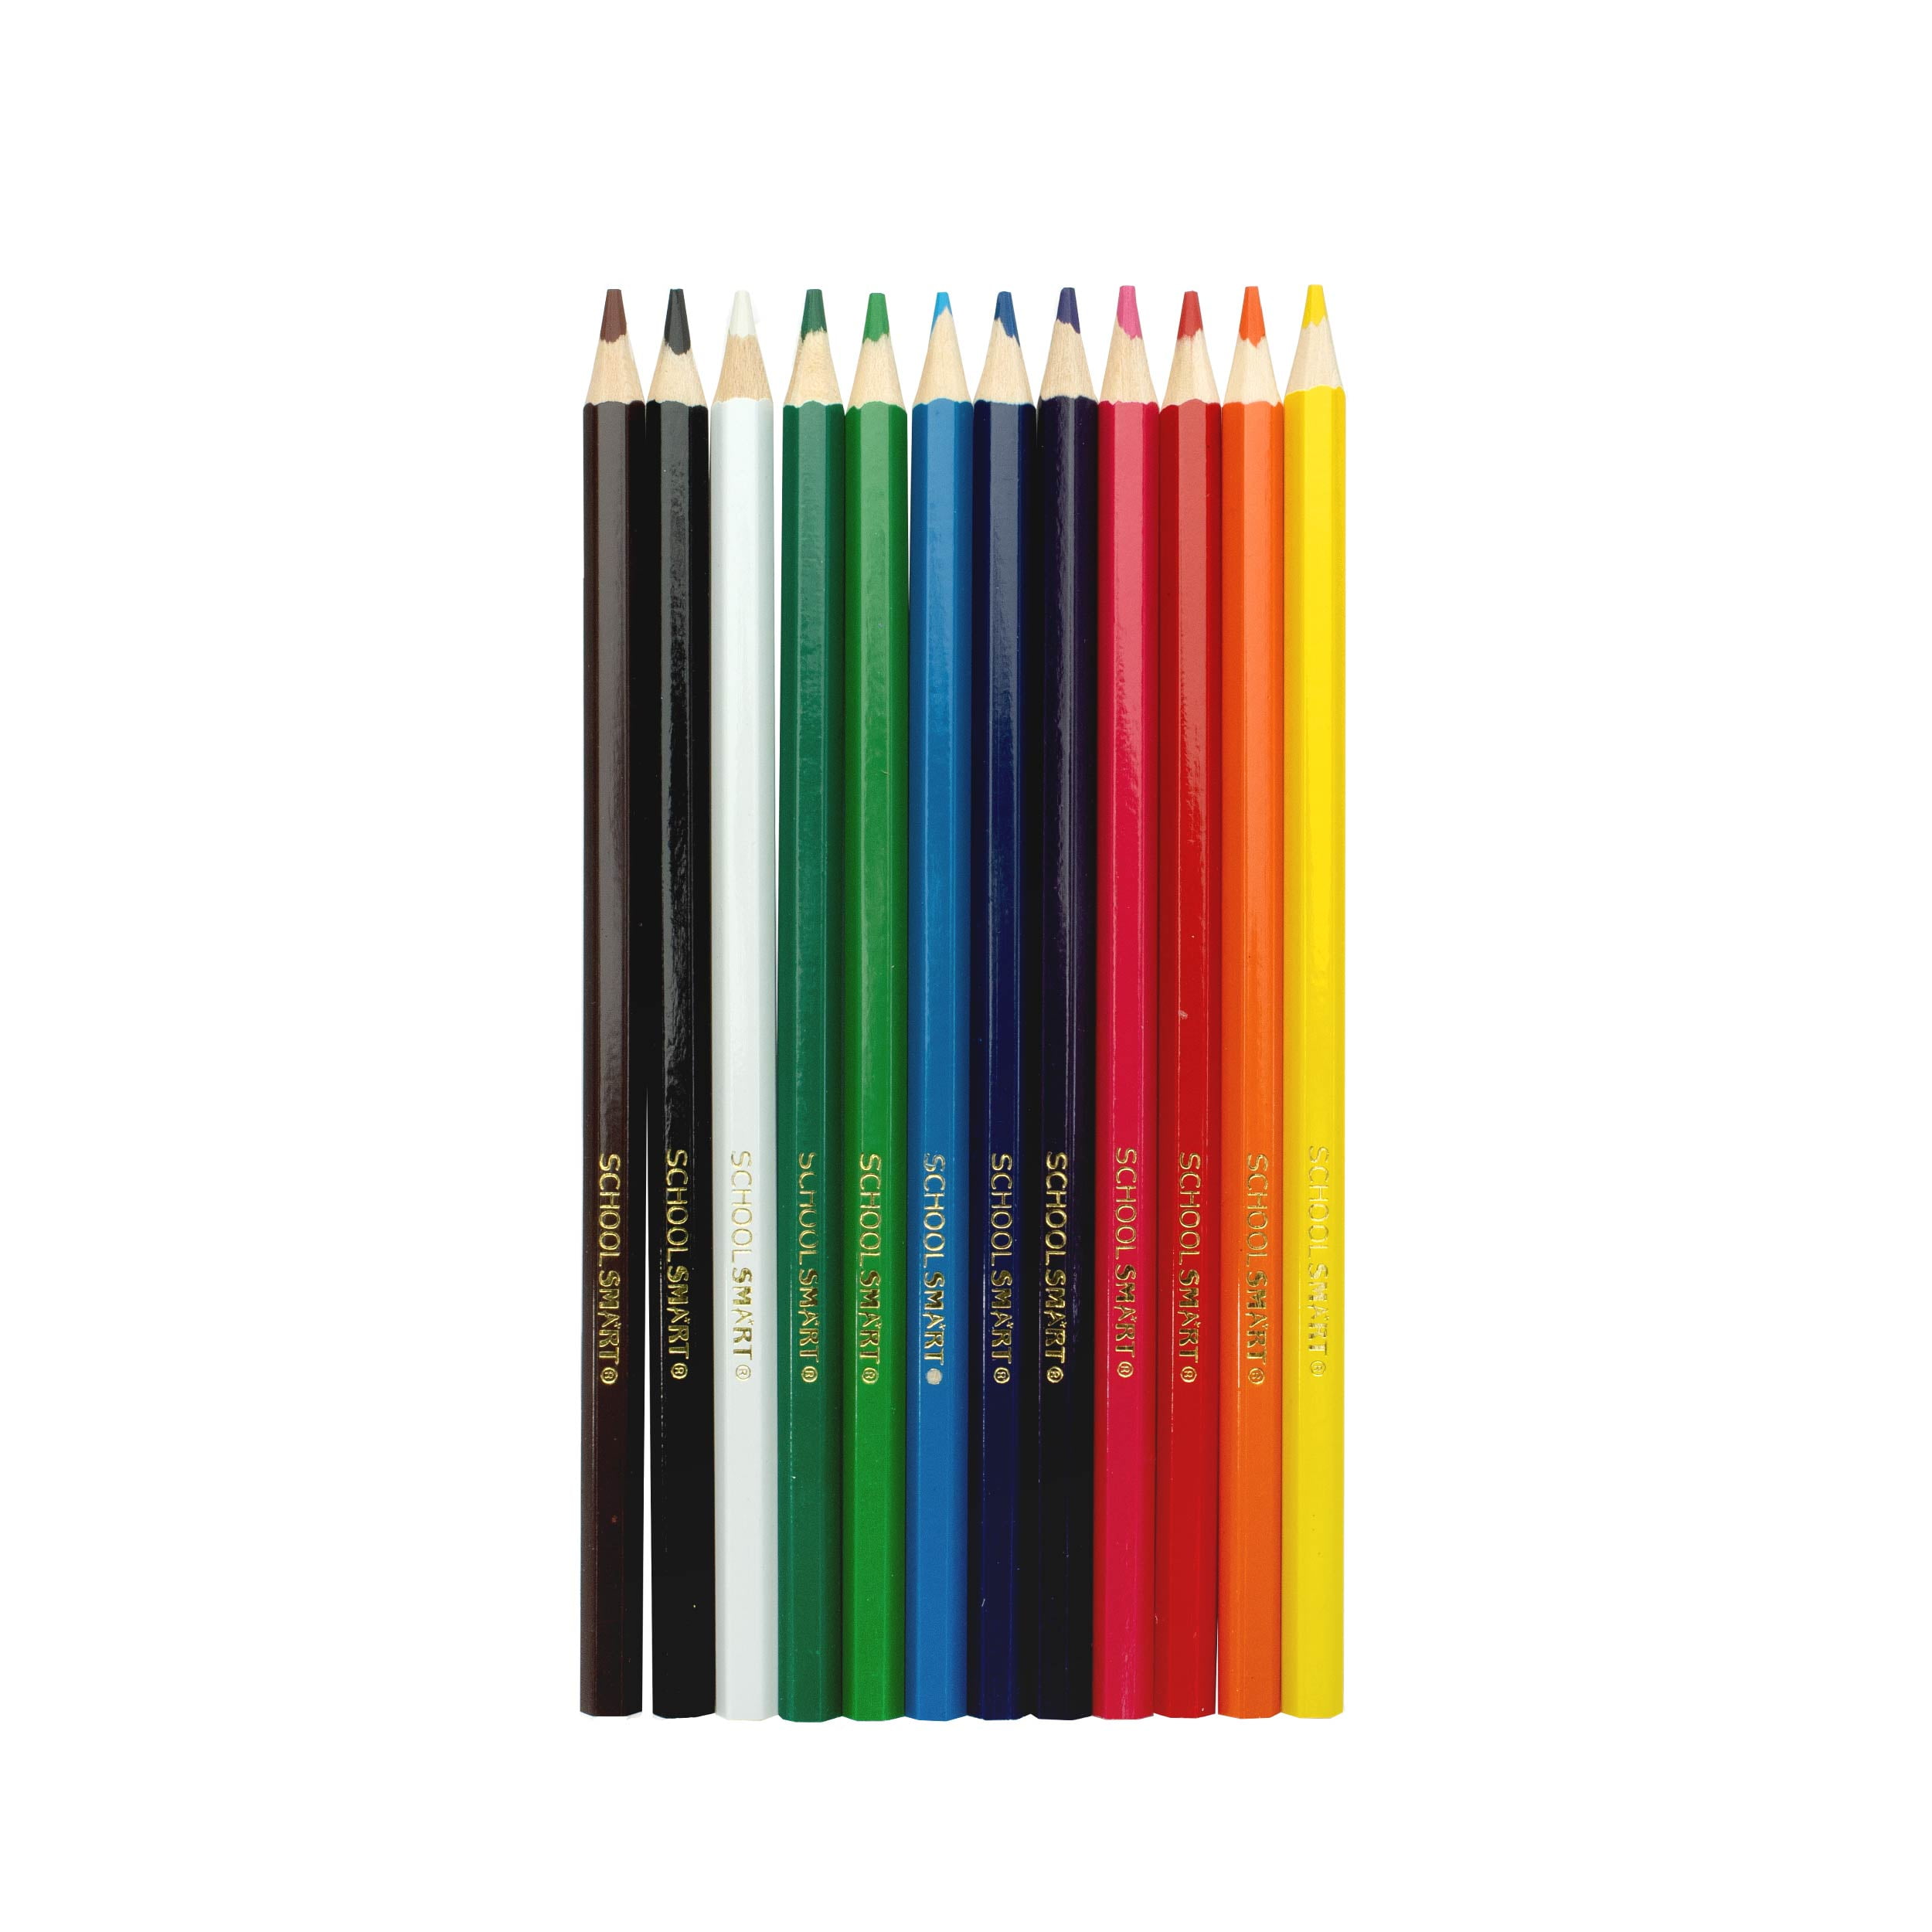 School Smart Professional Colored Pencils, Assorted Colors, Pack of 480